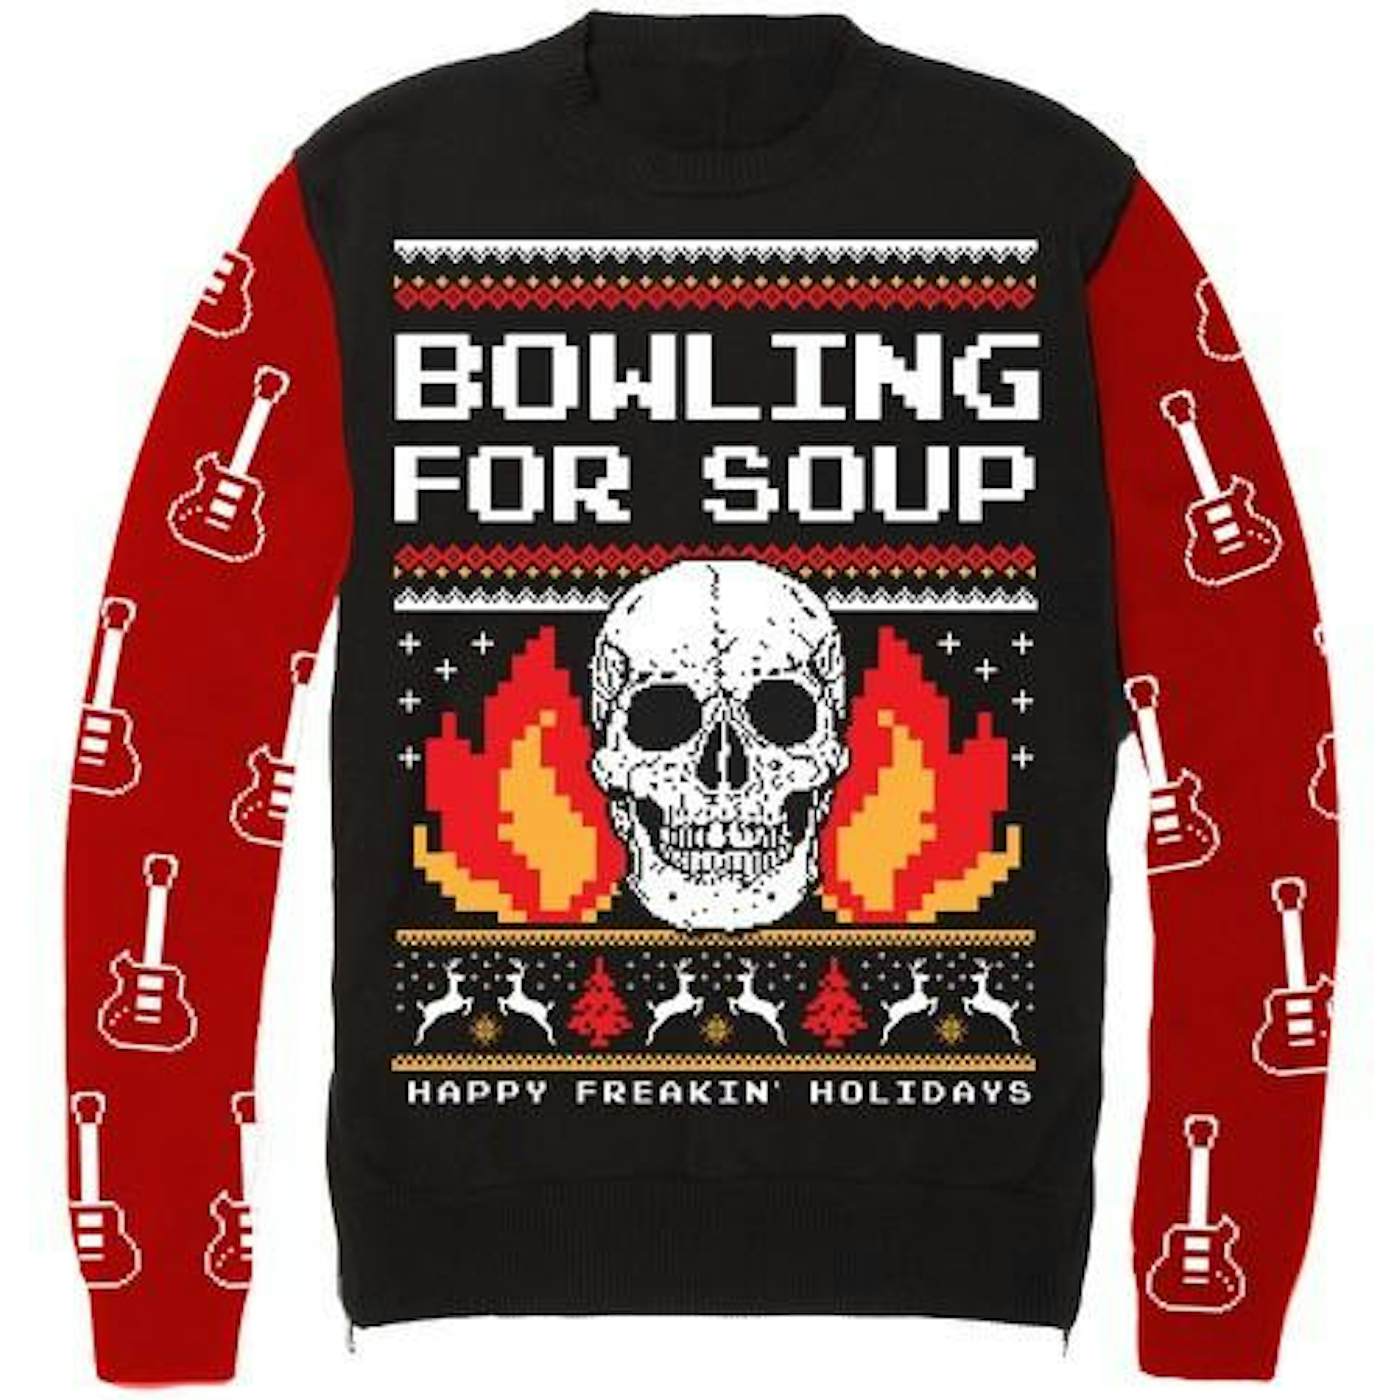 Bowling For Soup - Happy Freakin' Holidays Ugly Christmas Sweater (Small Only)